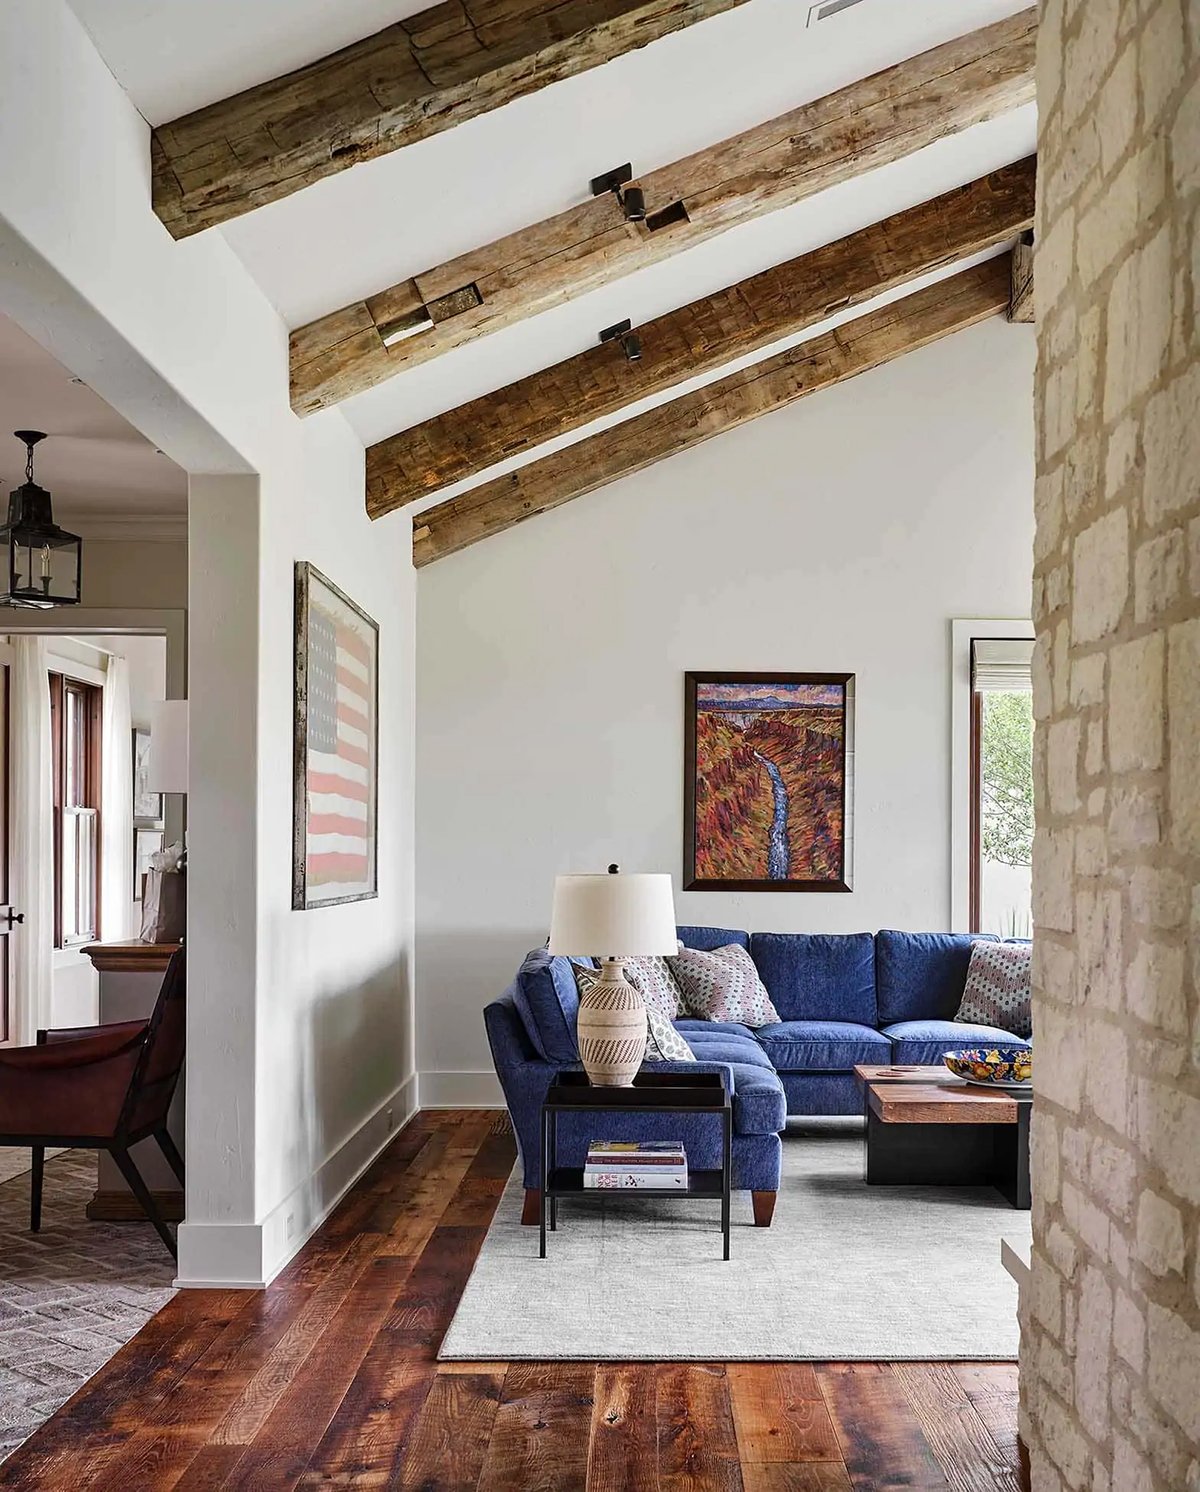 BM Winds breath living room walls with navy couch and rustic ceiling beams